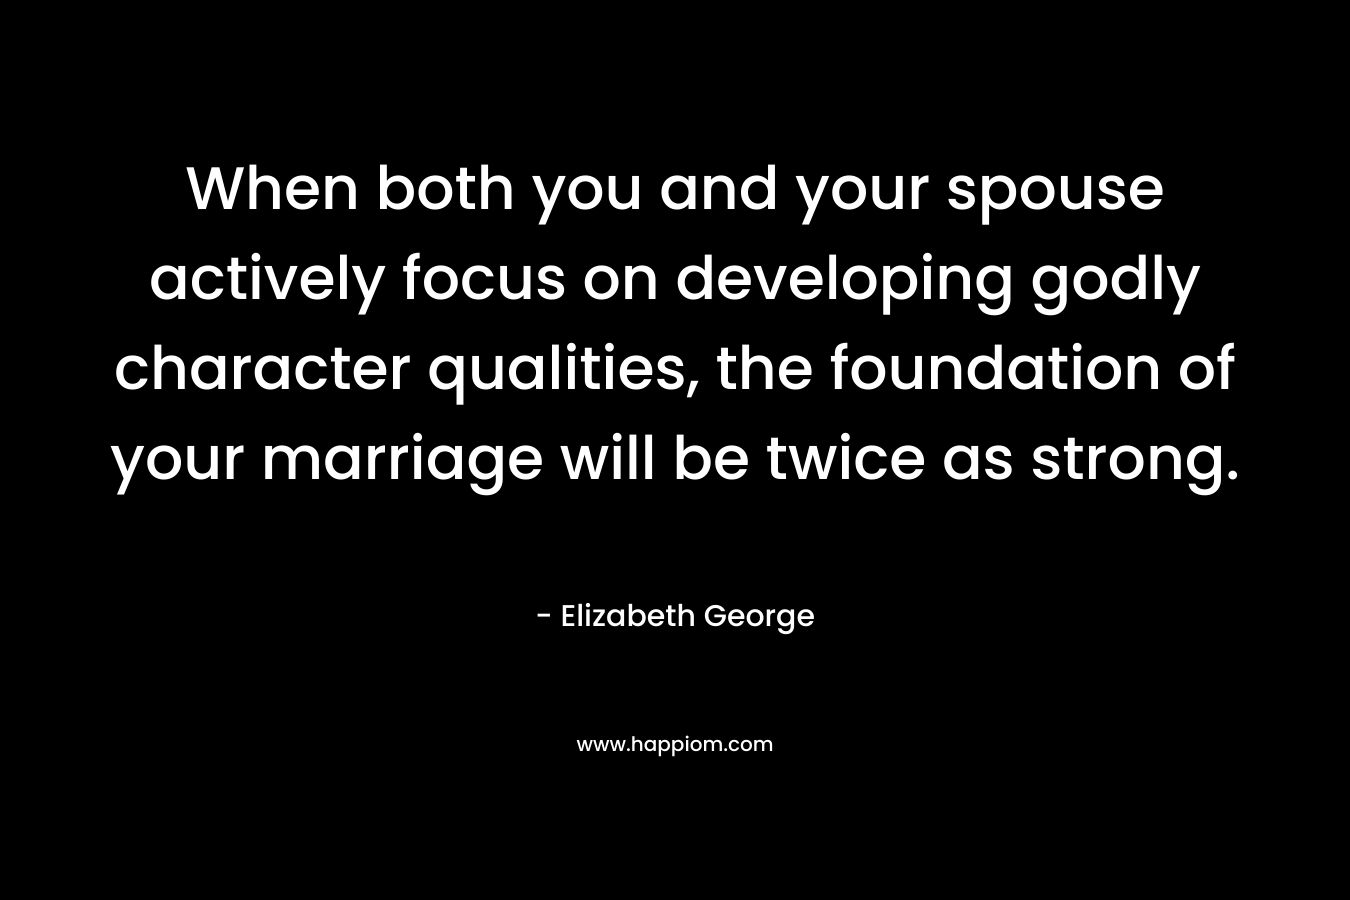 When both you and your spouse actively focus on developing godly character qualities, the foundation of your marriage will be twice as strong. – Elizabeth George